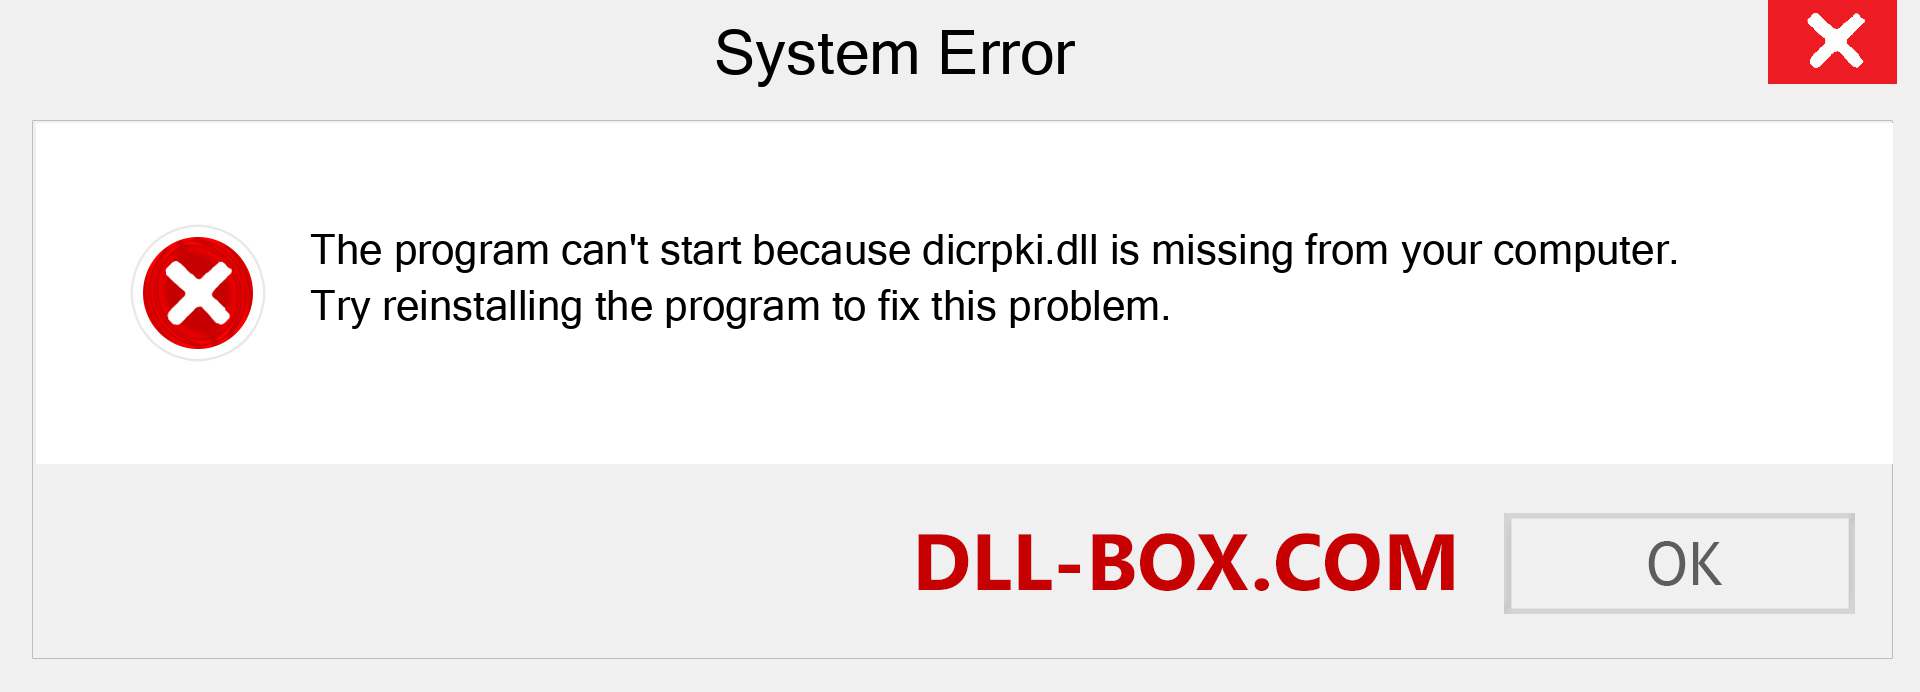  dicrpki.dll file is missing?. Download for Windows 7, 8, 10 - Fix  dicrpki dll Missing Error on Windows, photos, images